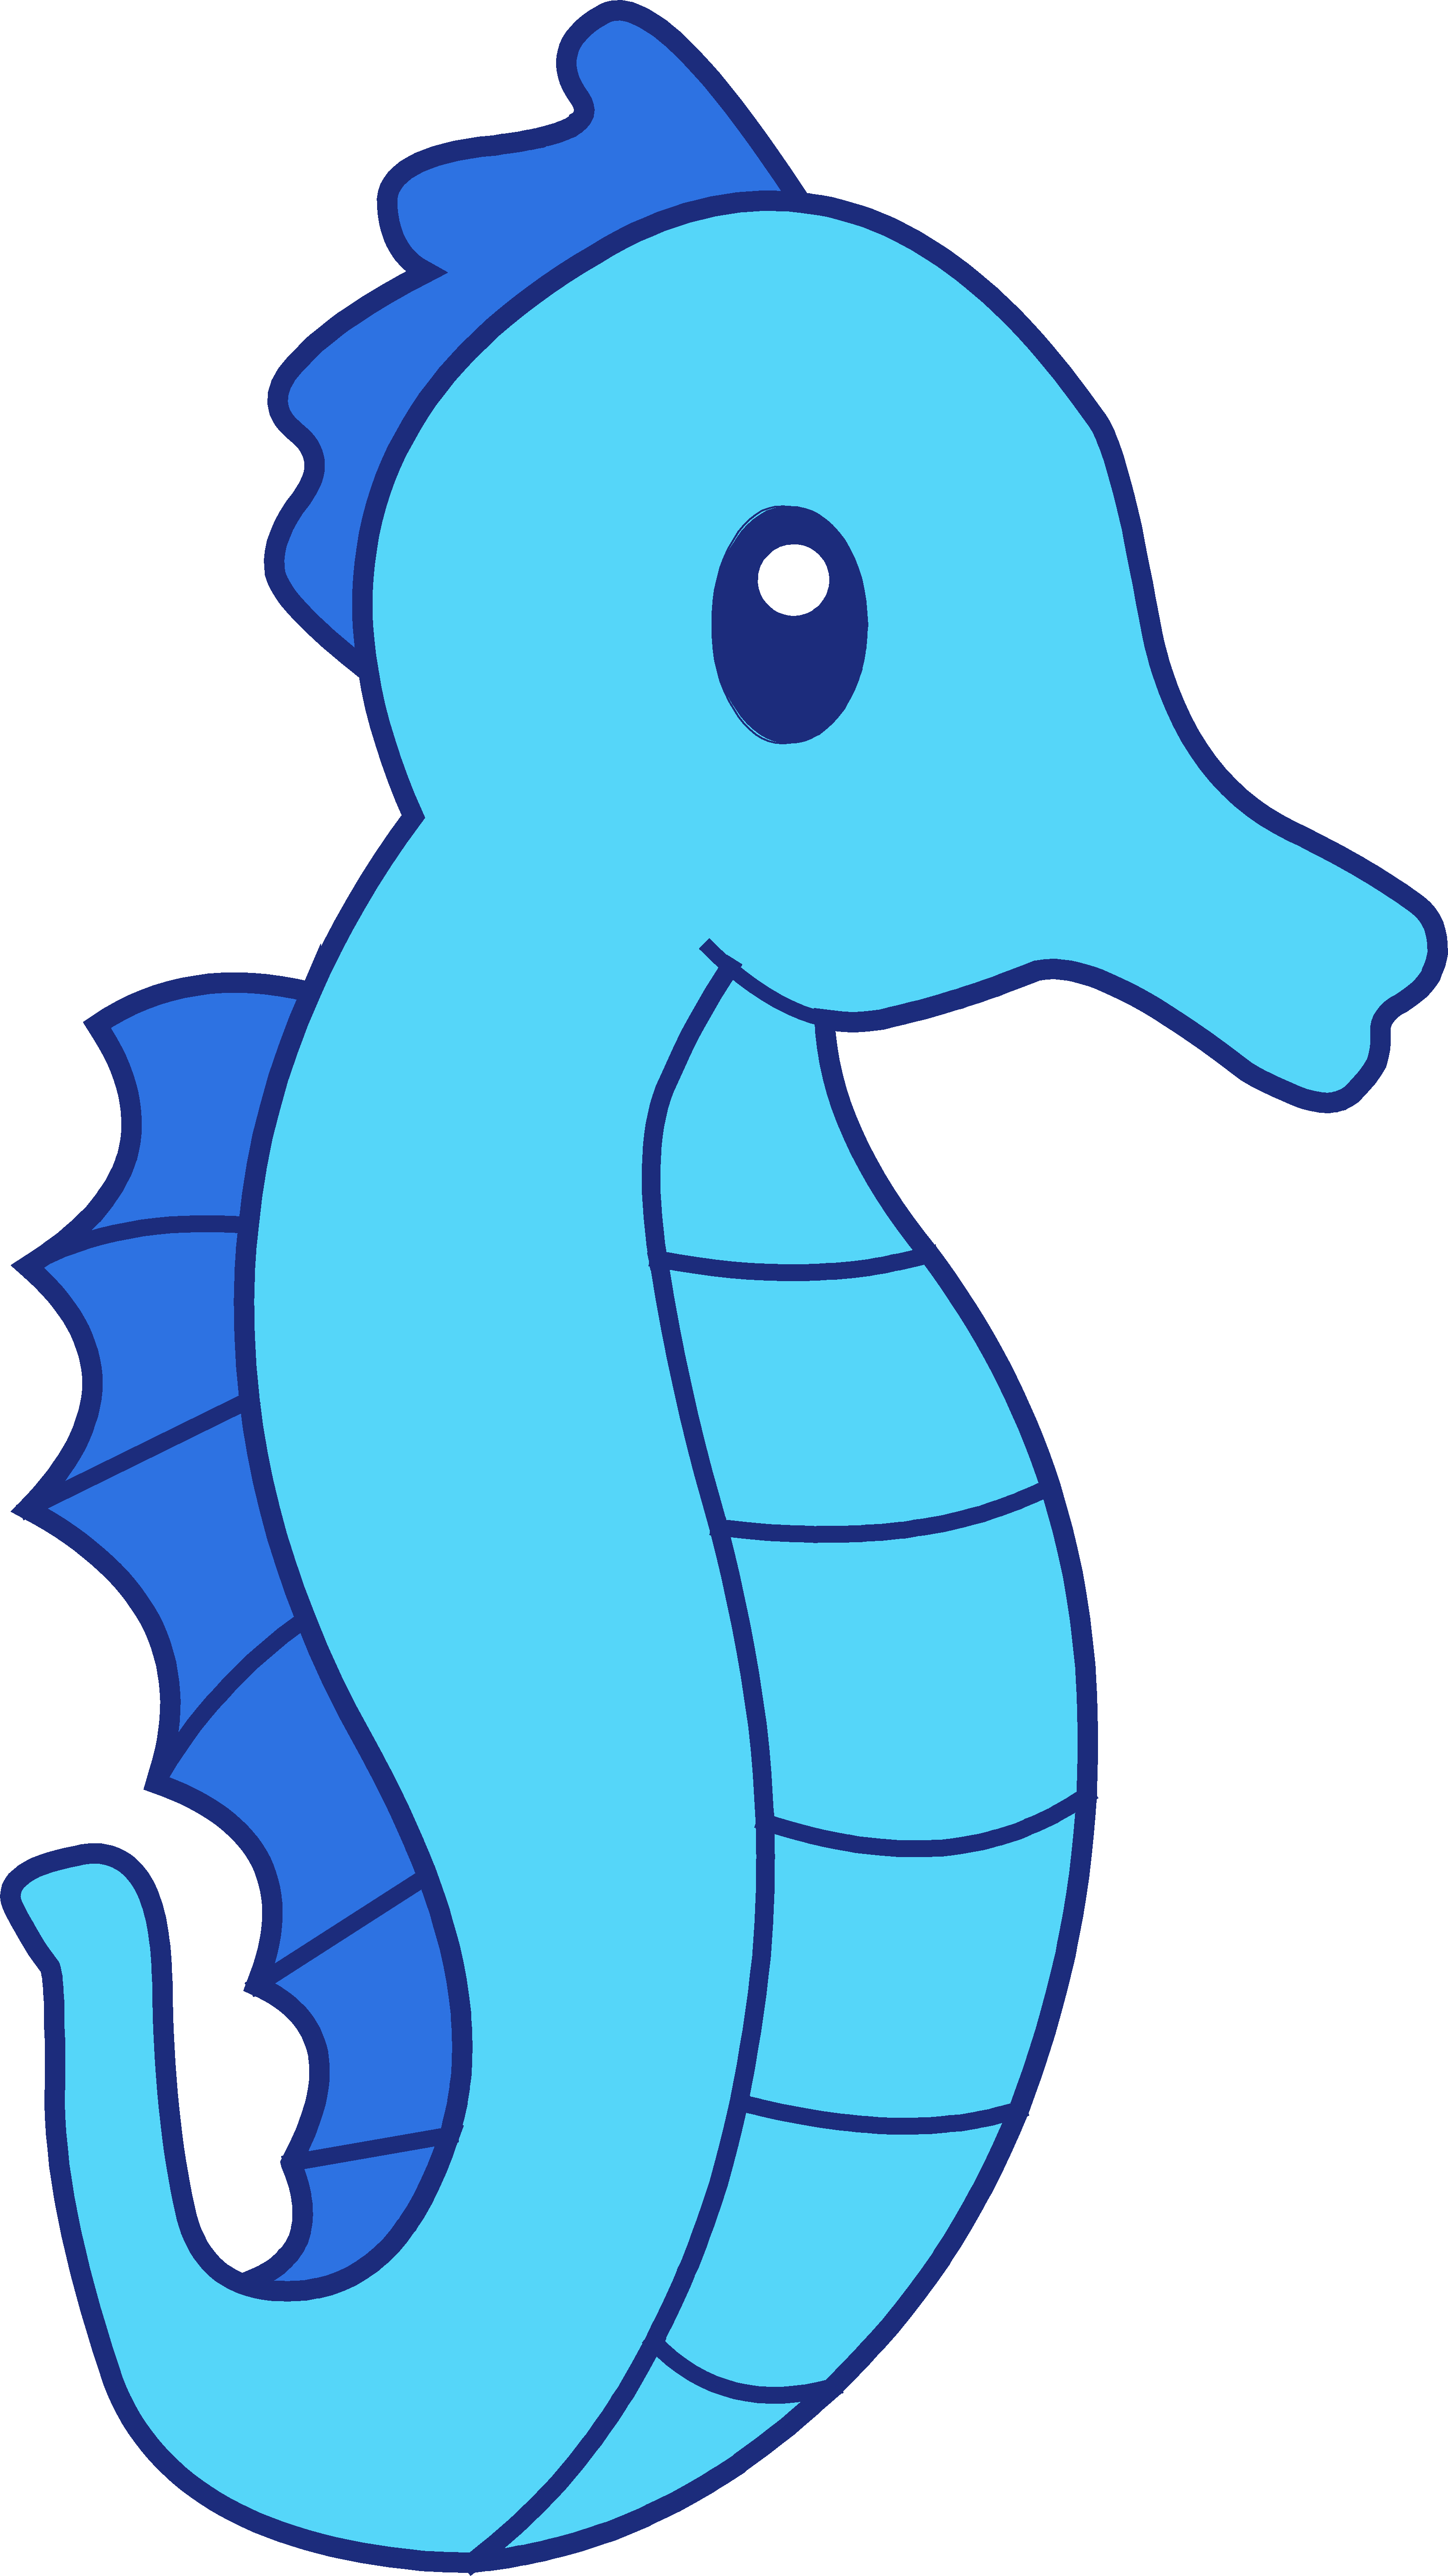 Cute Blue Fish Clipart | Clipart library - Free Clipart Images